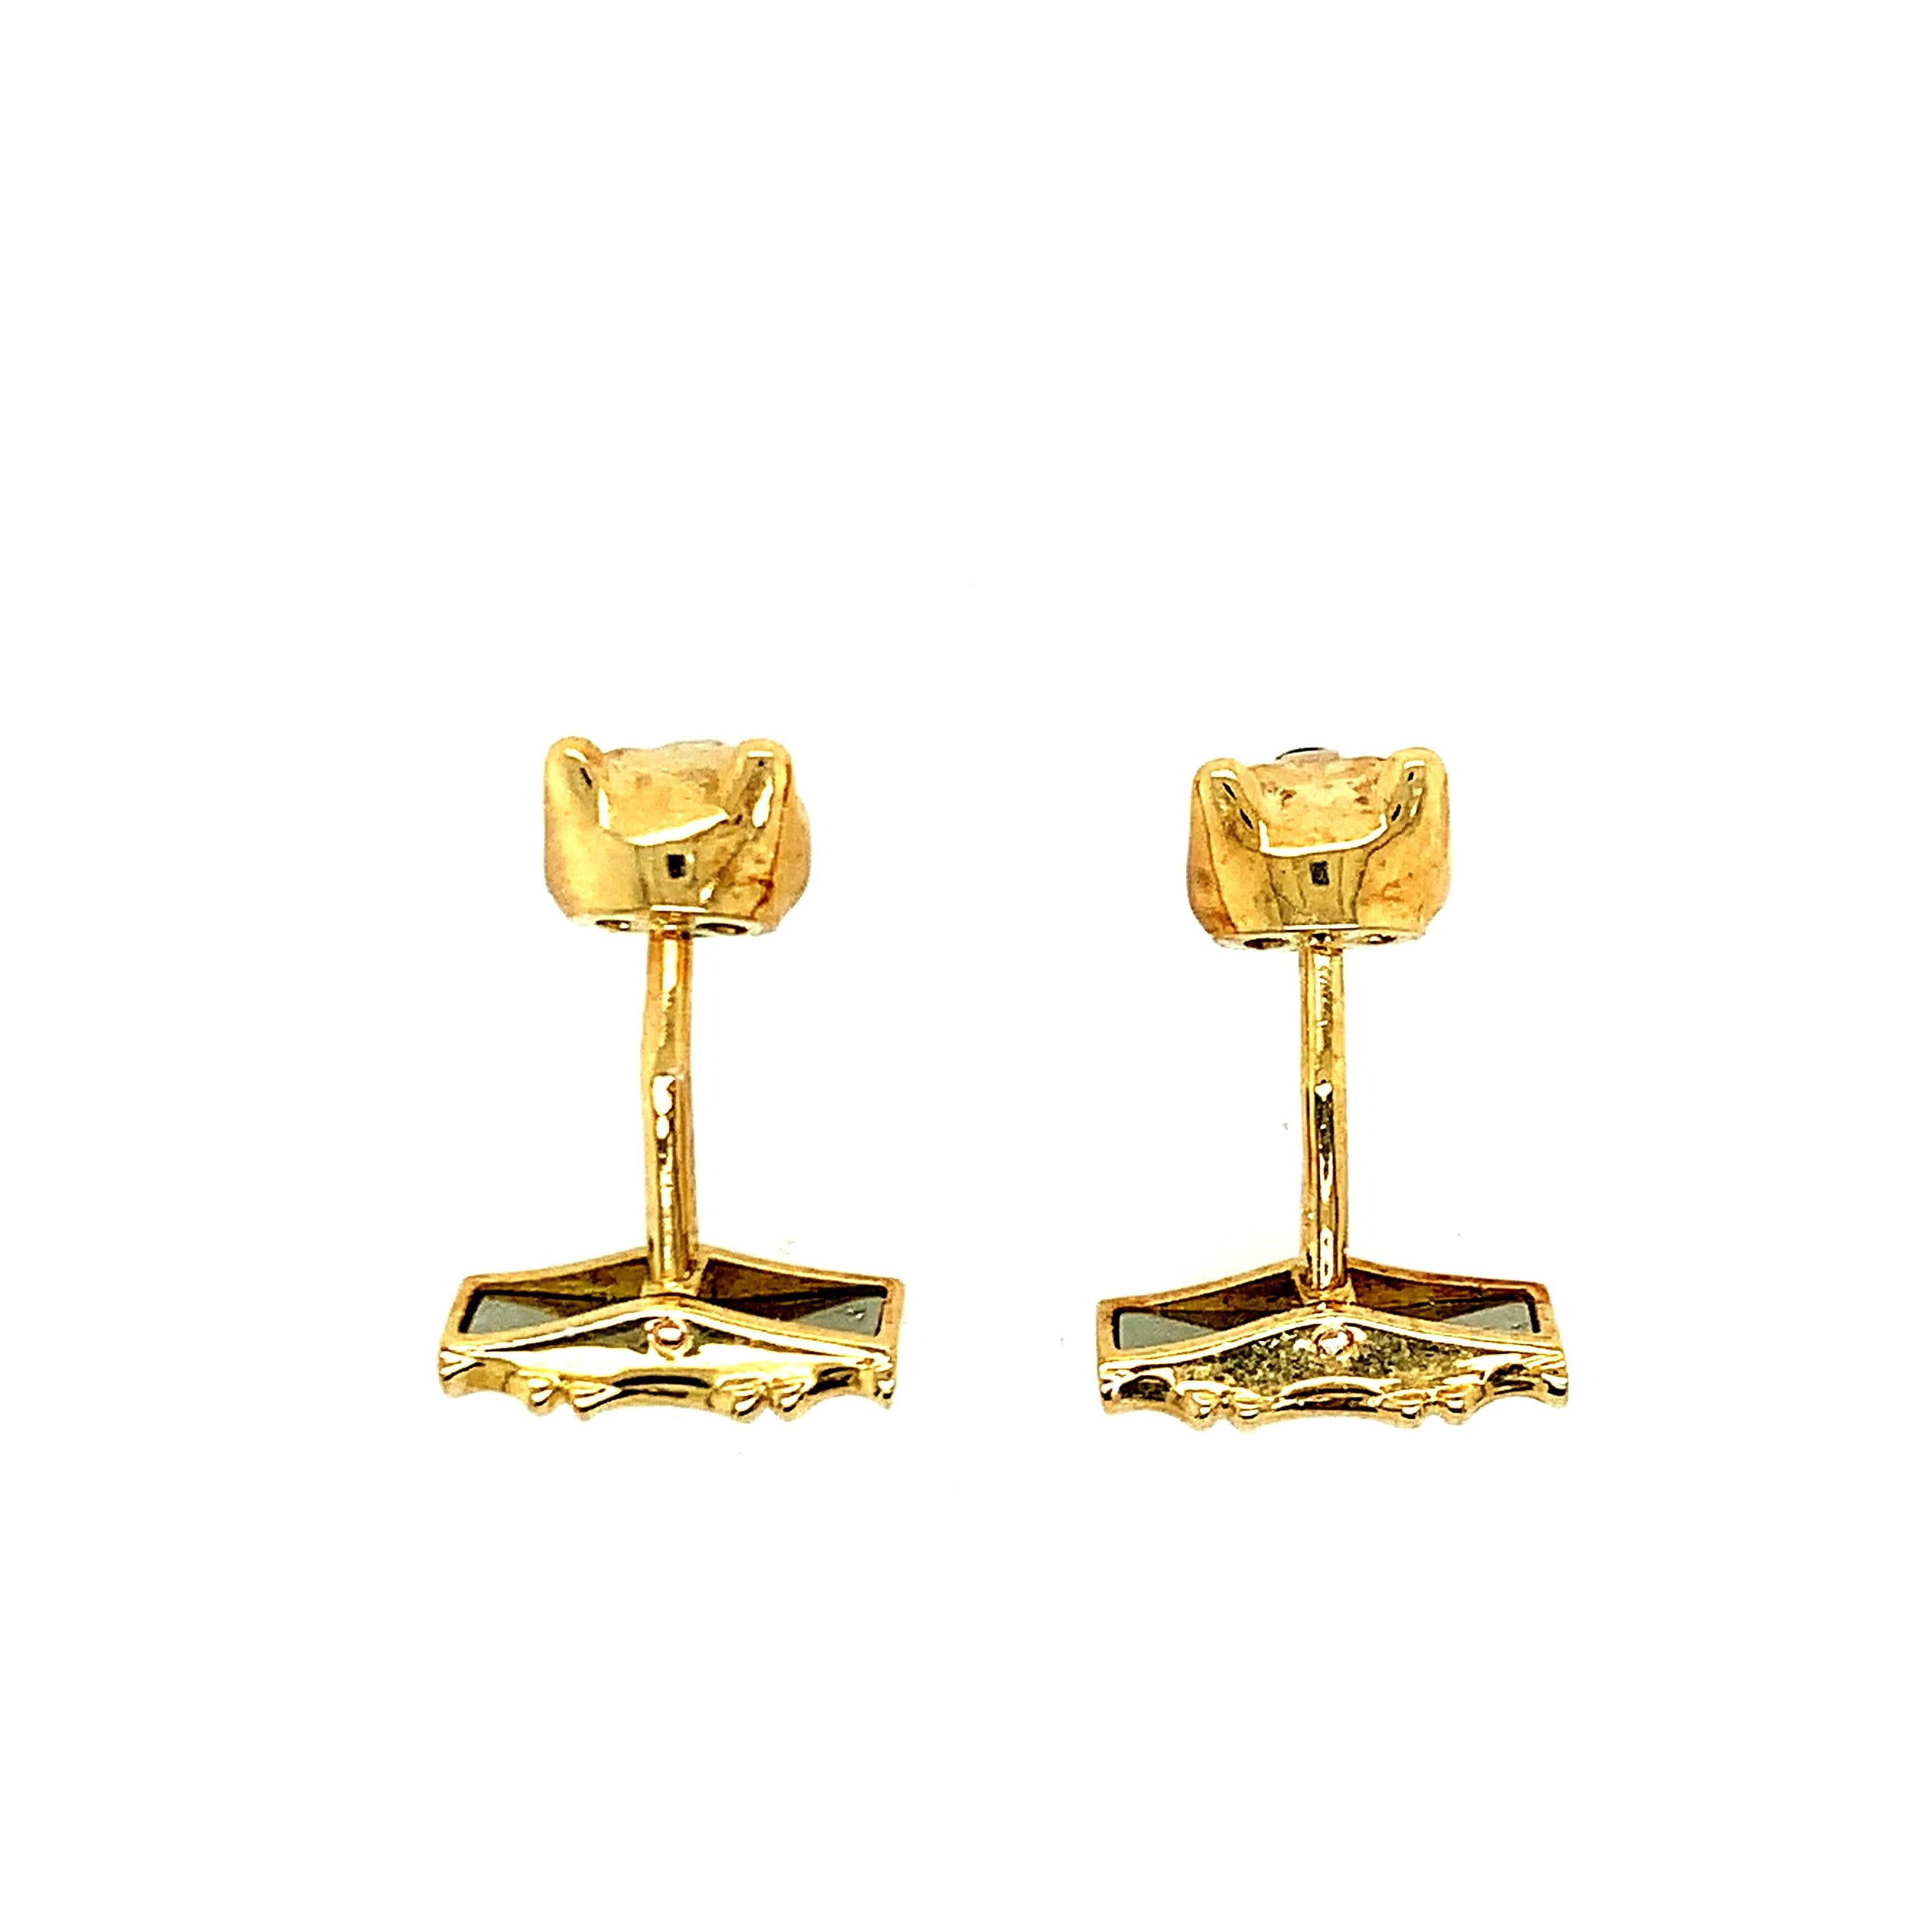 A classic Cartier motif, this panthére 18 karat gold cufflinks have emeralds for eyes and onyx for nose. Total weight: 12.3 grams. Length: 2.4 cm. 

Serial No. 660633